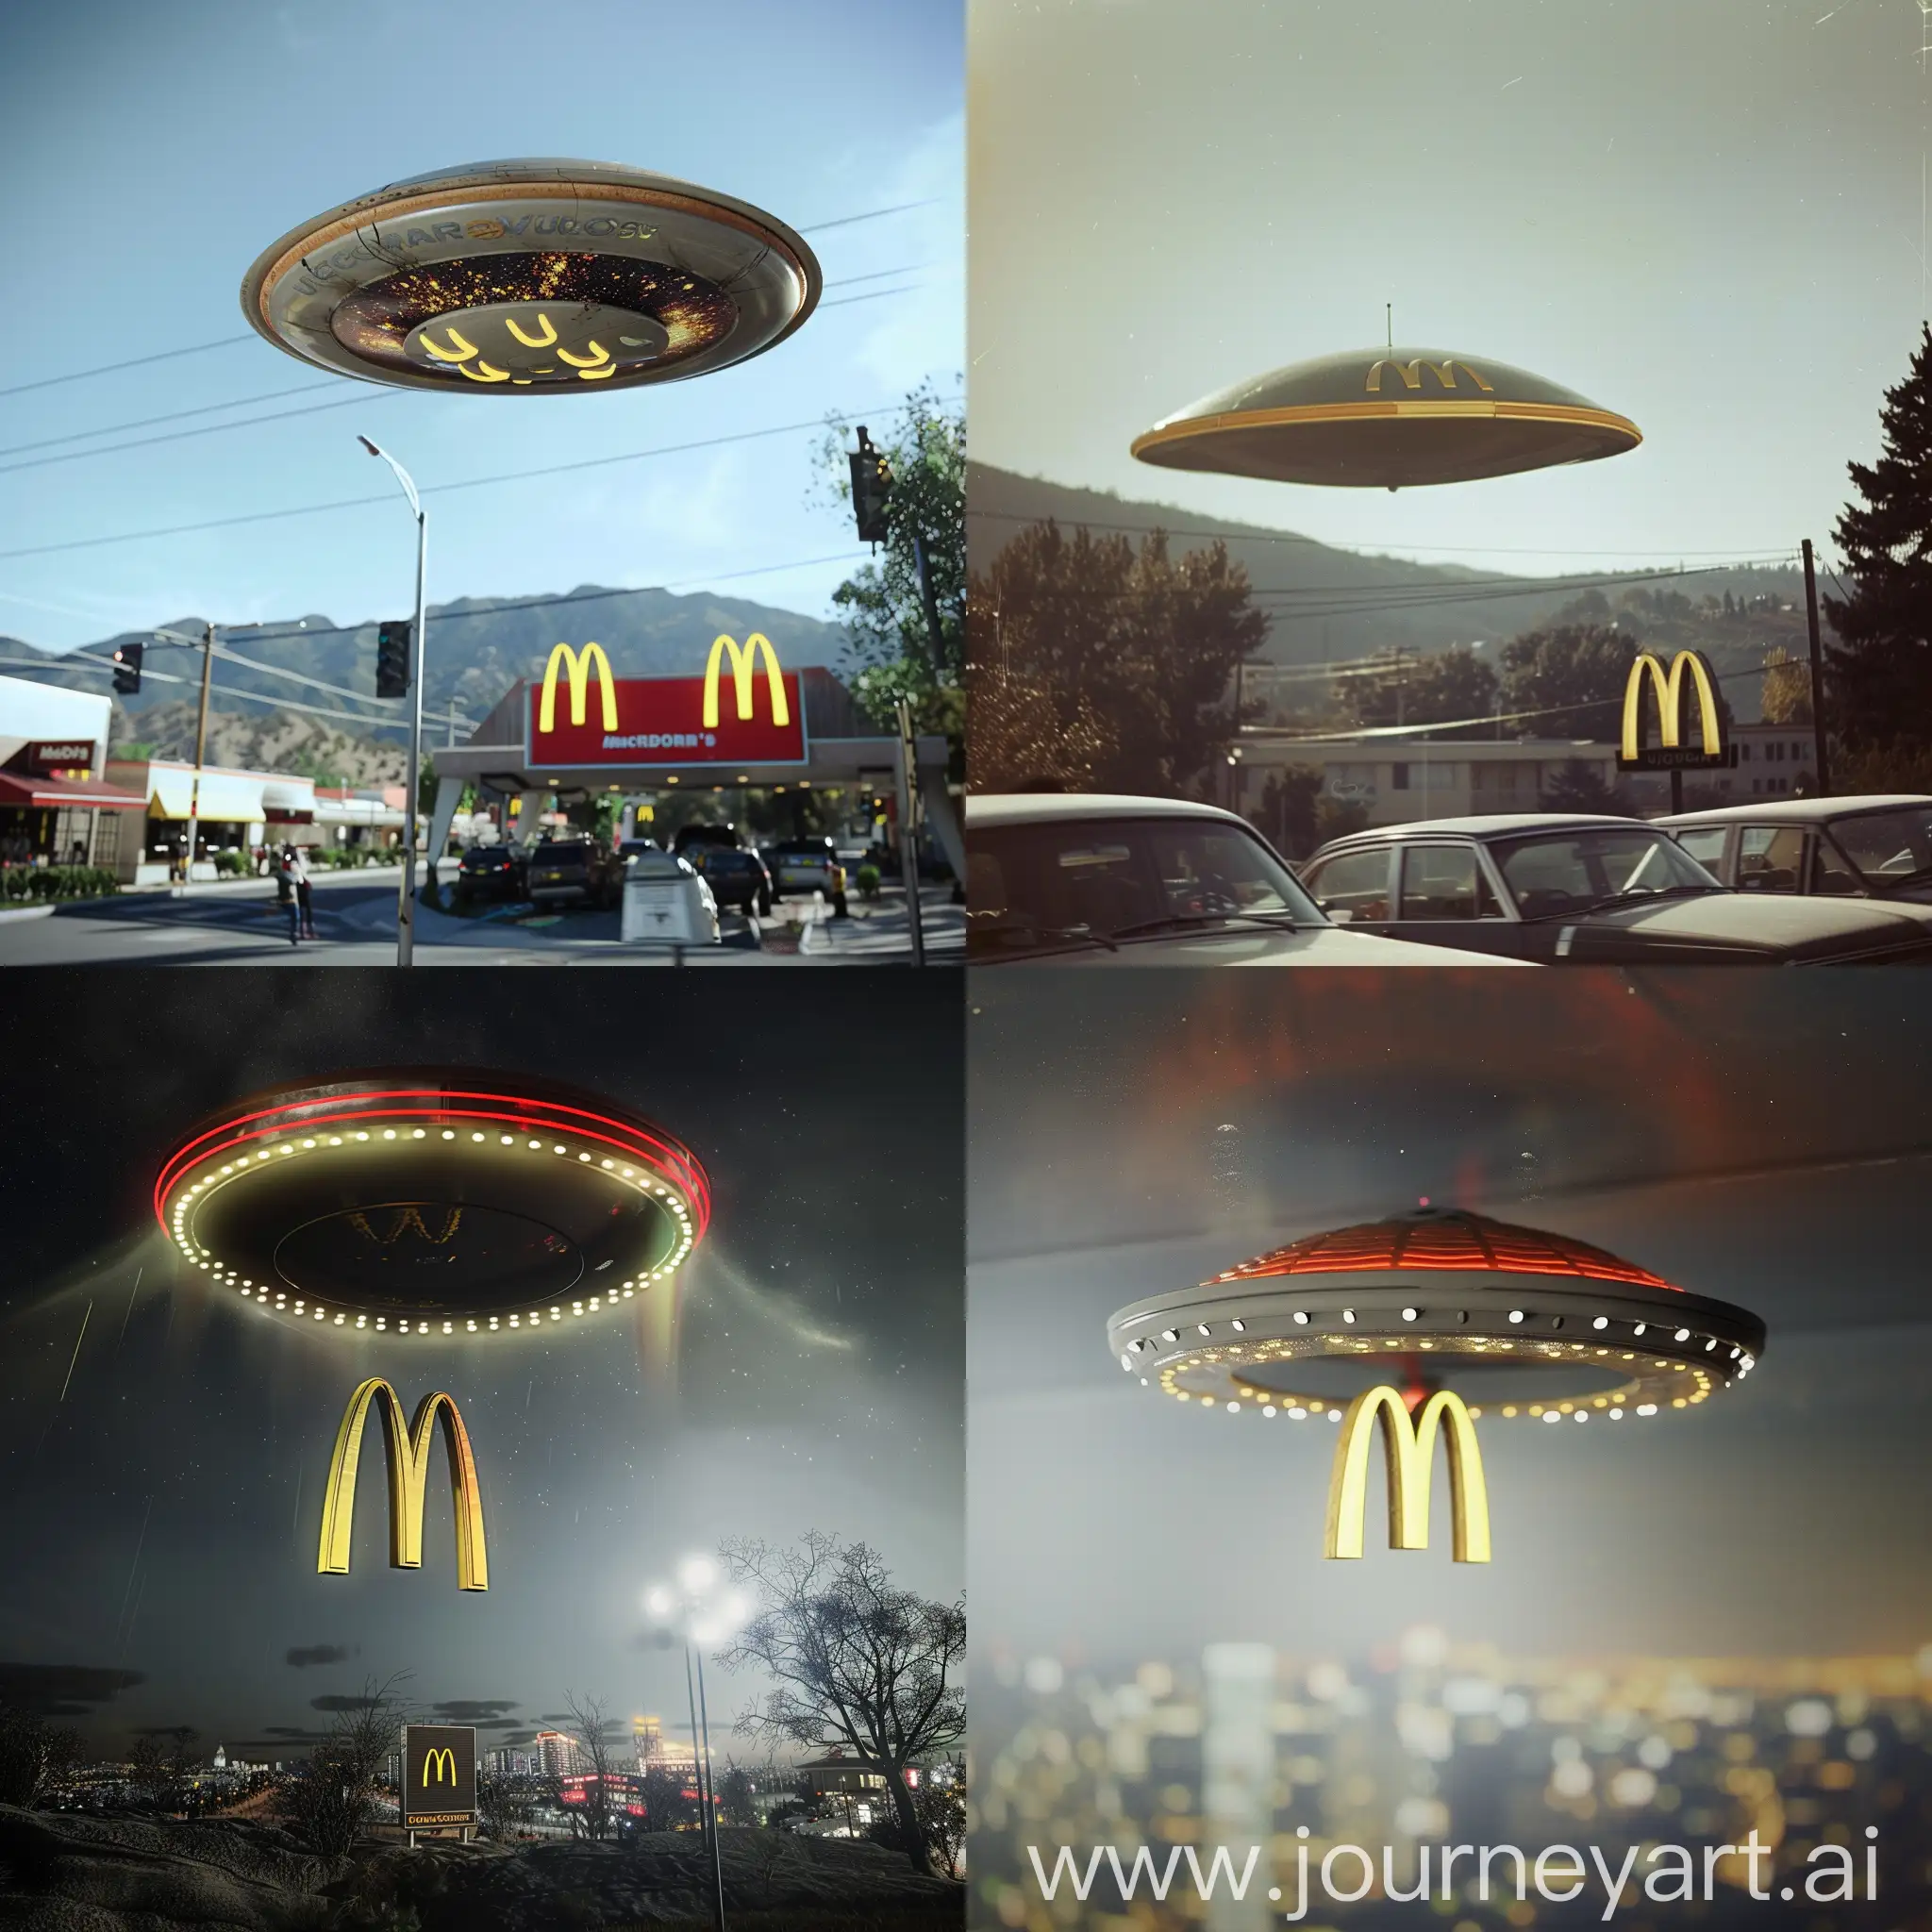 Unidentified-Flying-Object-UFO-Abducting-Overweight-Woman-at-McDonalds